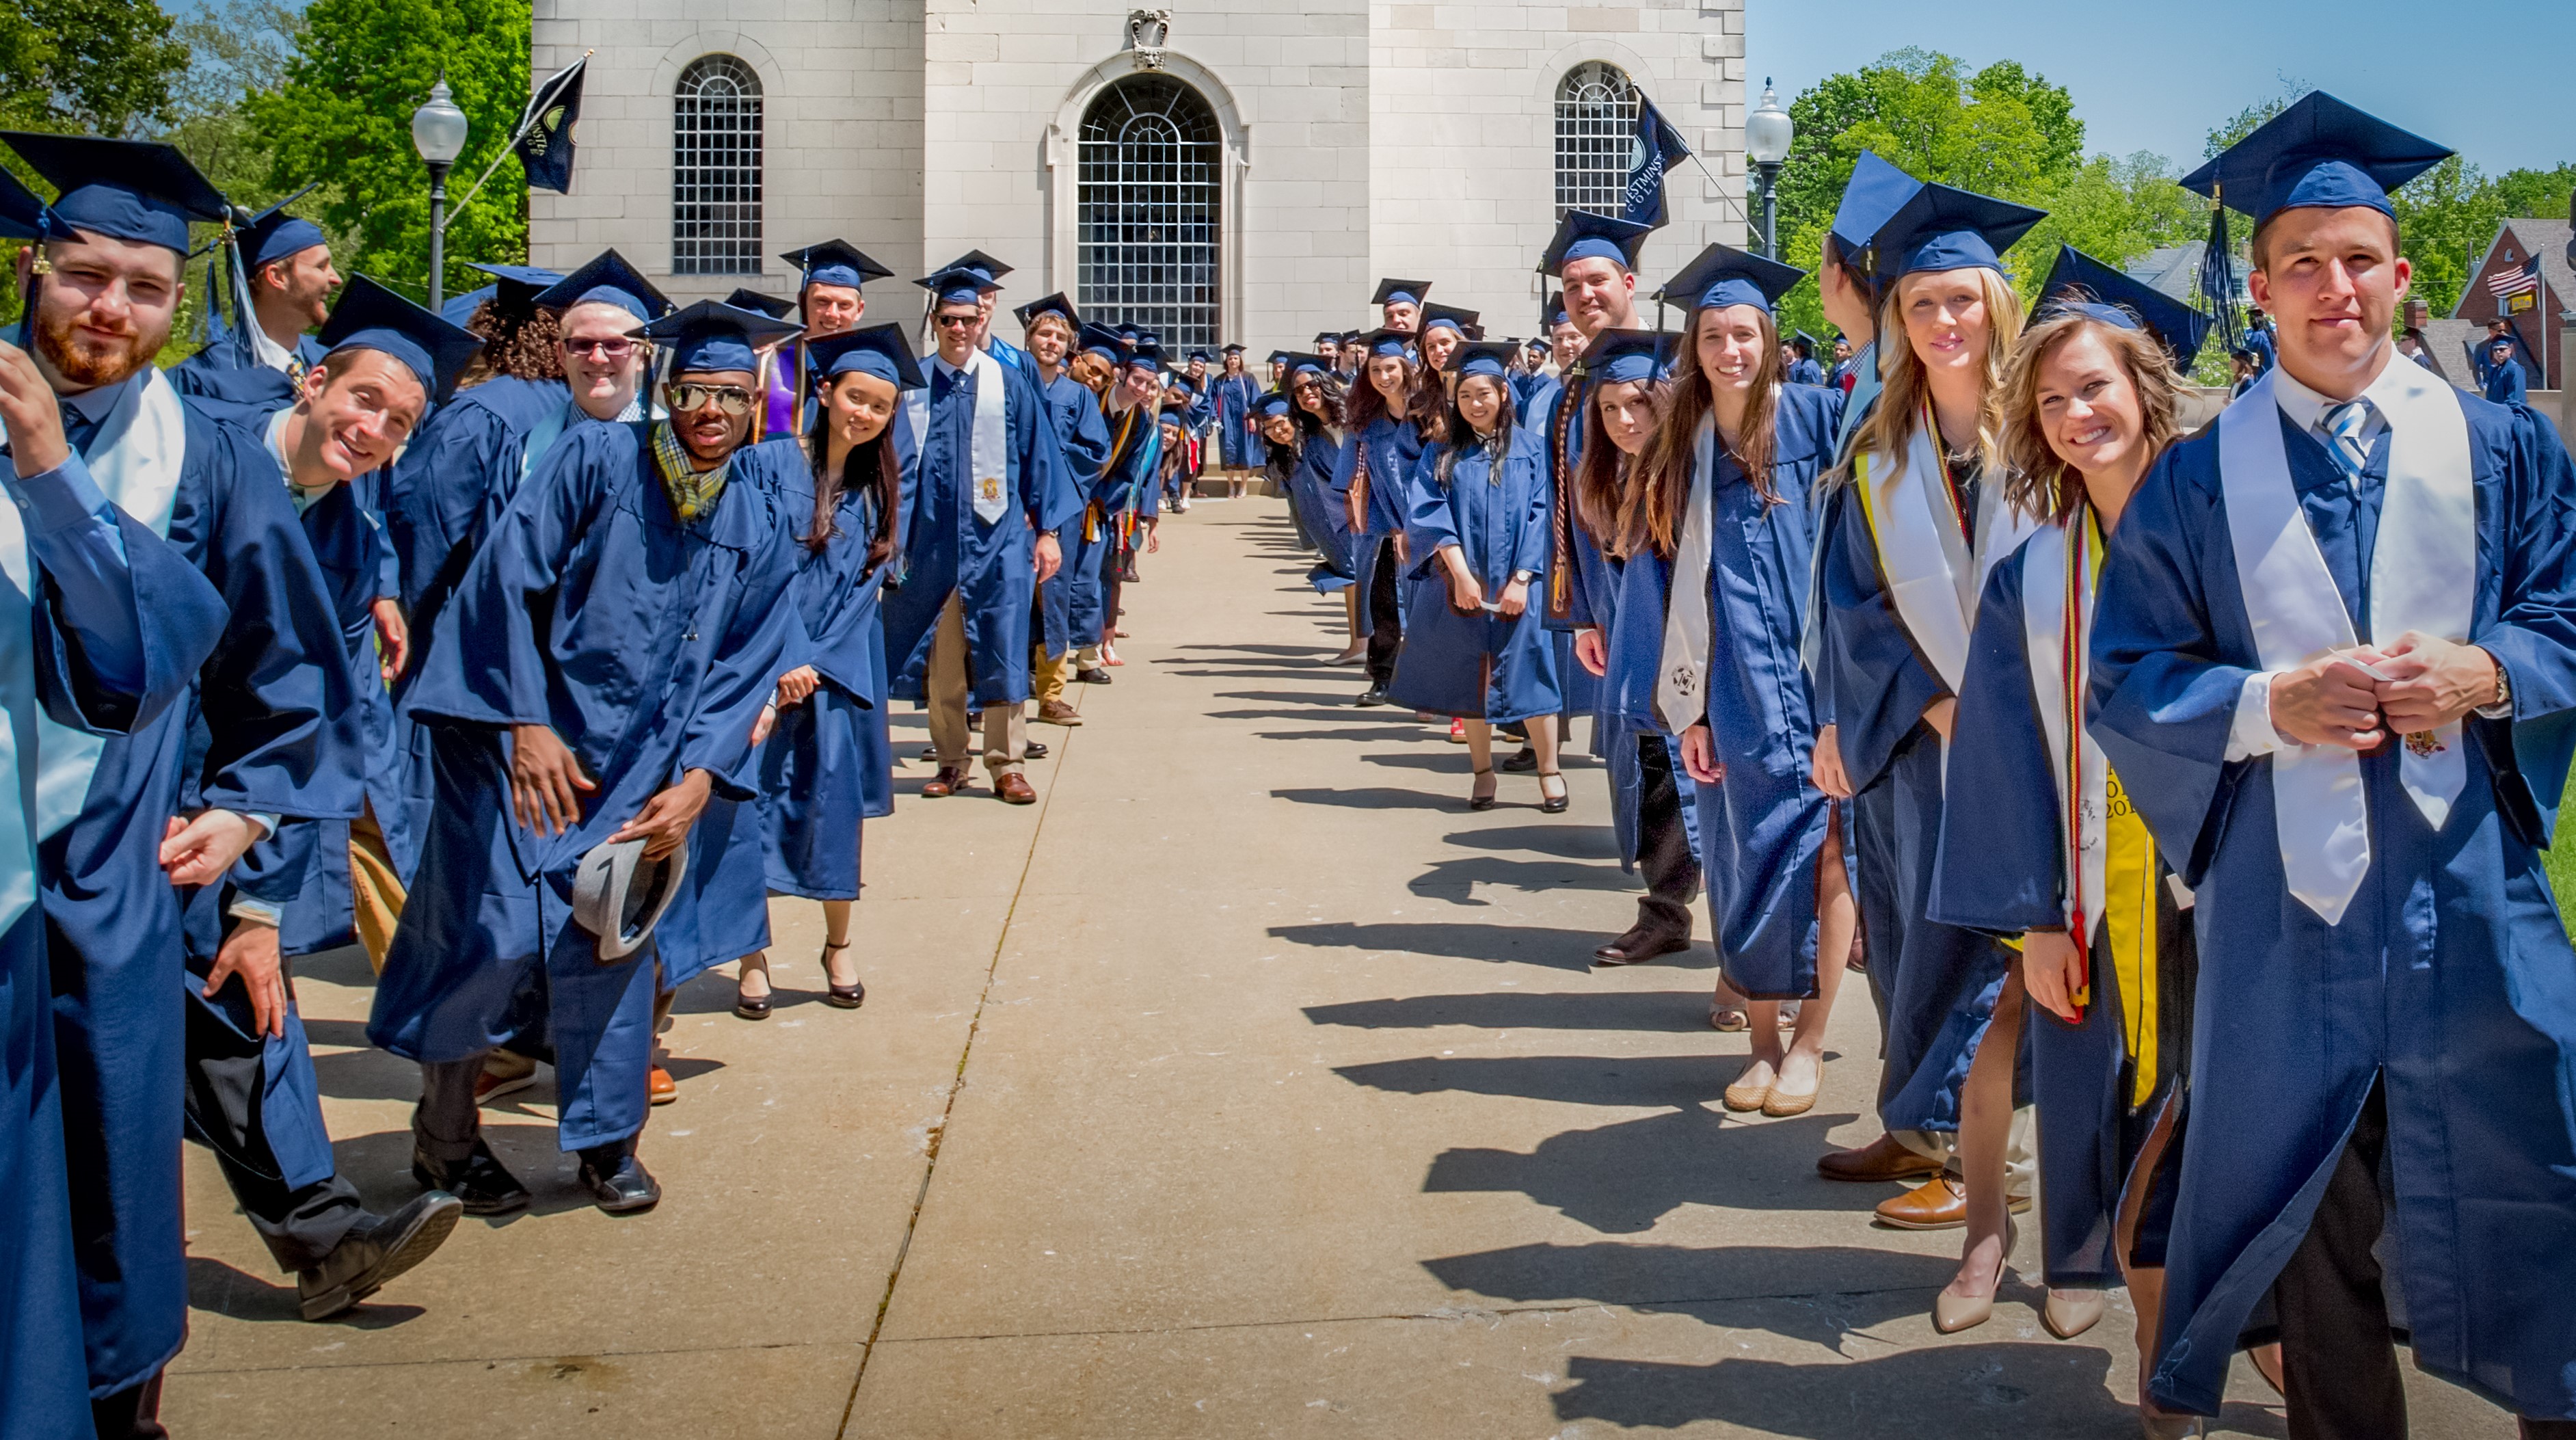 Westminster College Students walking in front of the National Churchill Museum in a Blue graduation cap and gown